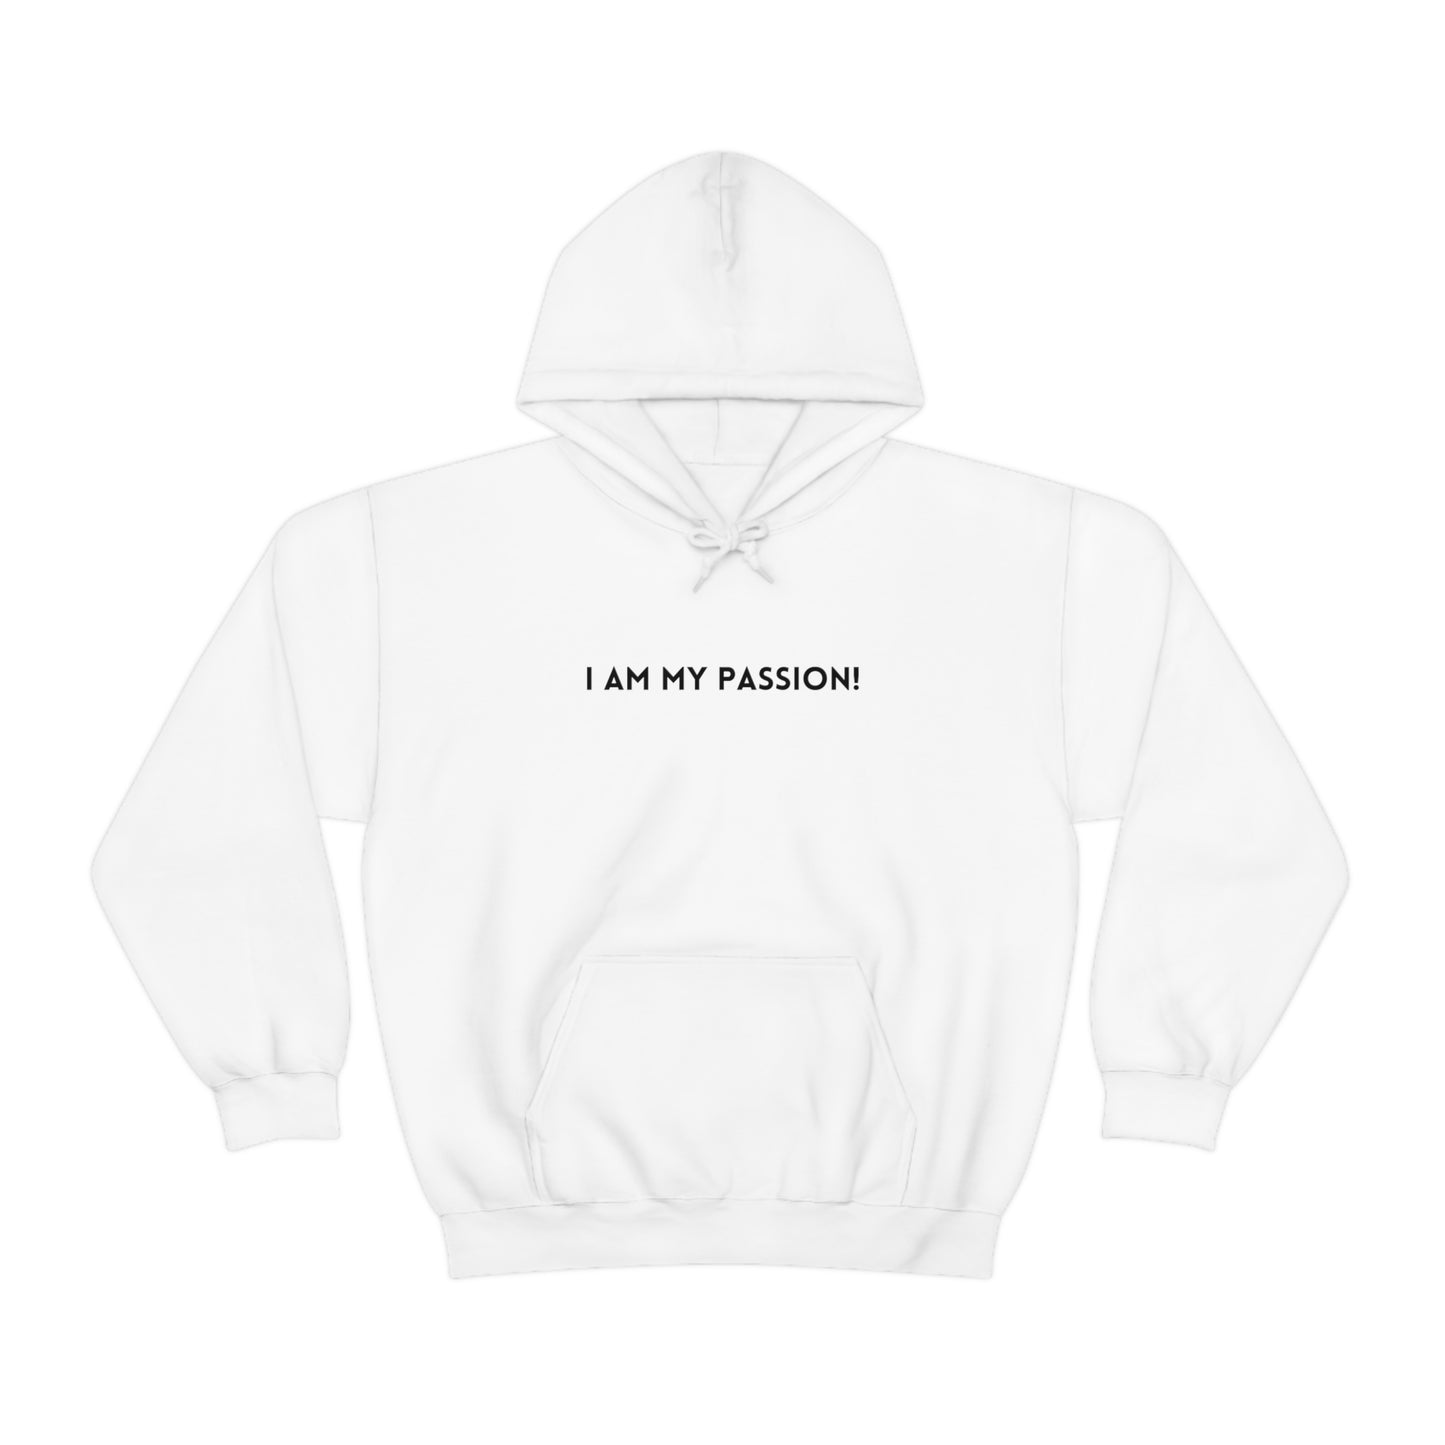 I am my passion unisex hooded sweatshirt gift,  inspirational words hoodie gift, hoodie gift for friends or family( Black Font)